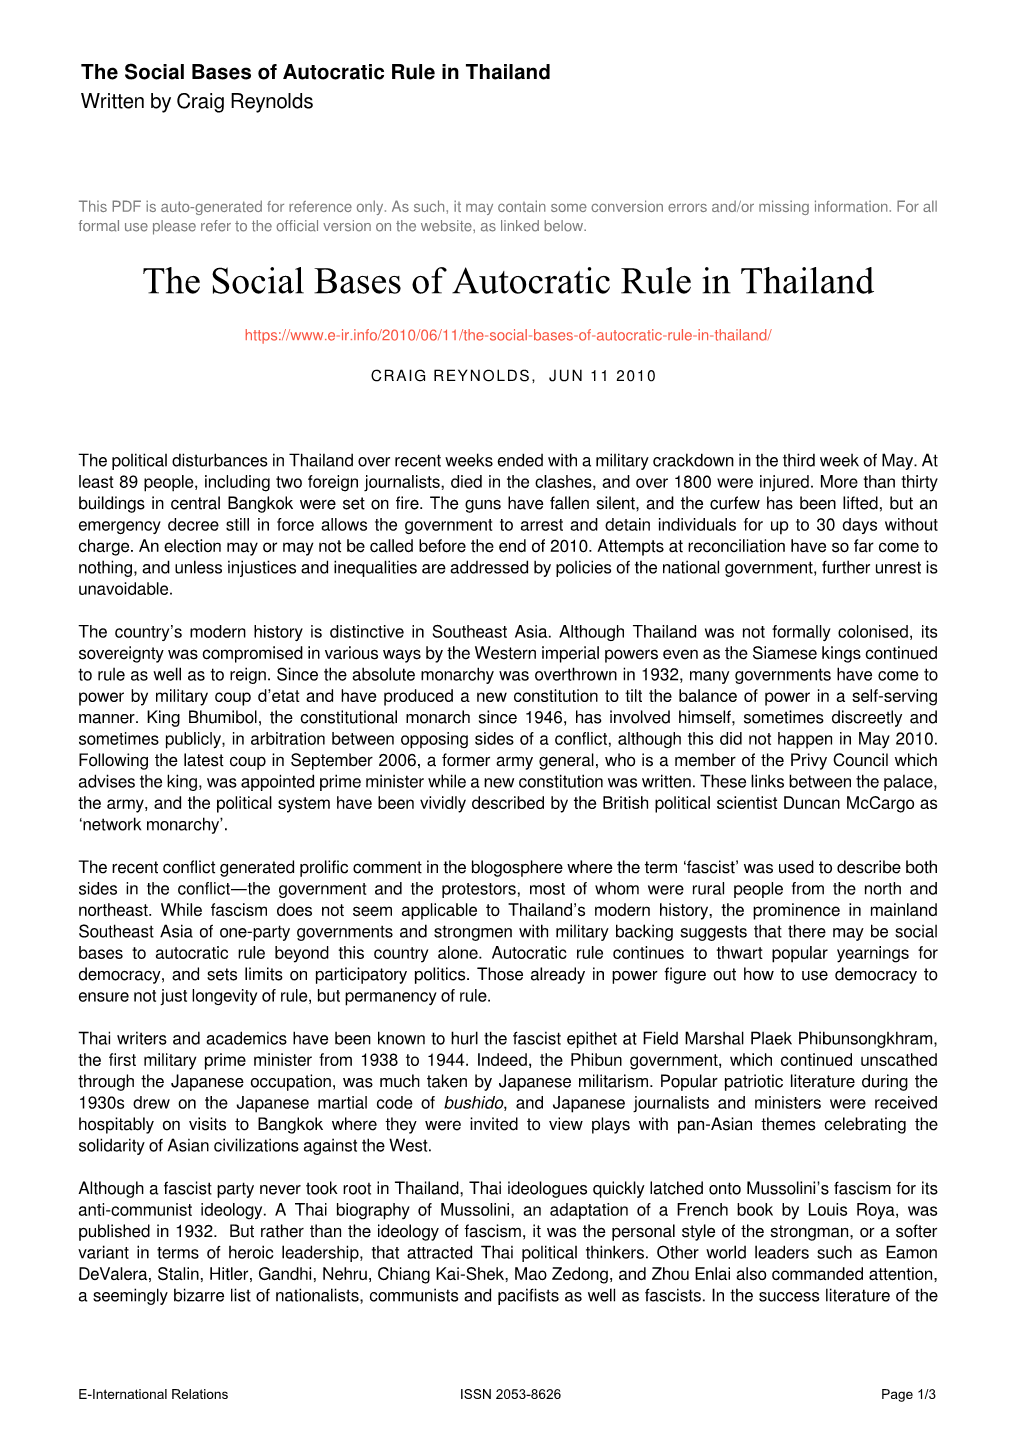 The Social Bases of Autocratic Rule in Thailand Written by Craig Reynolds